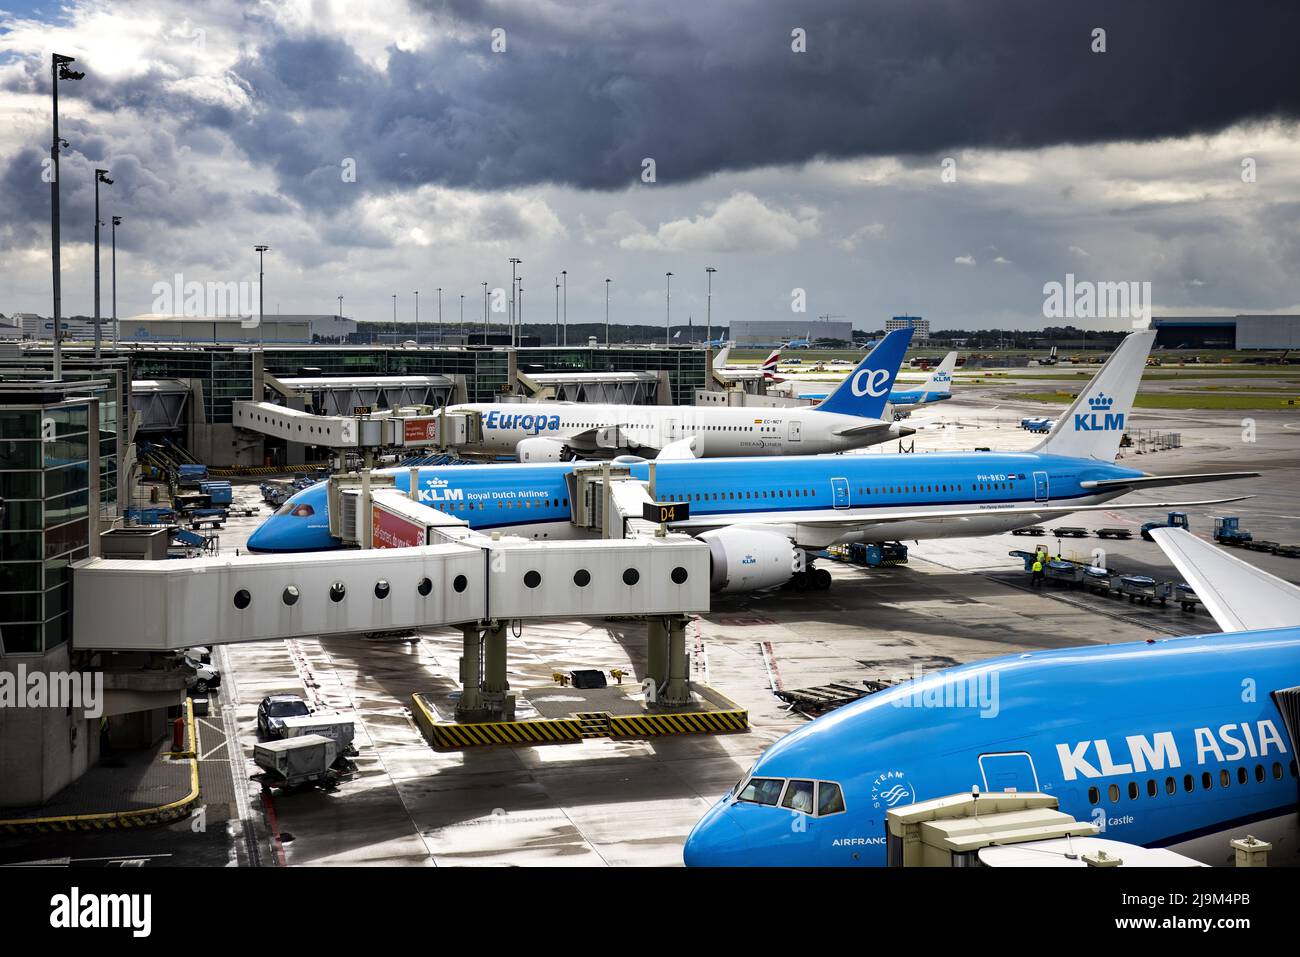 SCHIPHOL, Amsterdam, 2022-05-24 09:38:40 SCHIPHOL - Several KLM aircraft  are waiting at their gate at Schiphol. Aviation group Air France-KLM wants  to raise almost 2.3 billion euros with the issue of shares